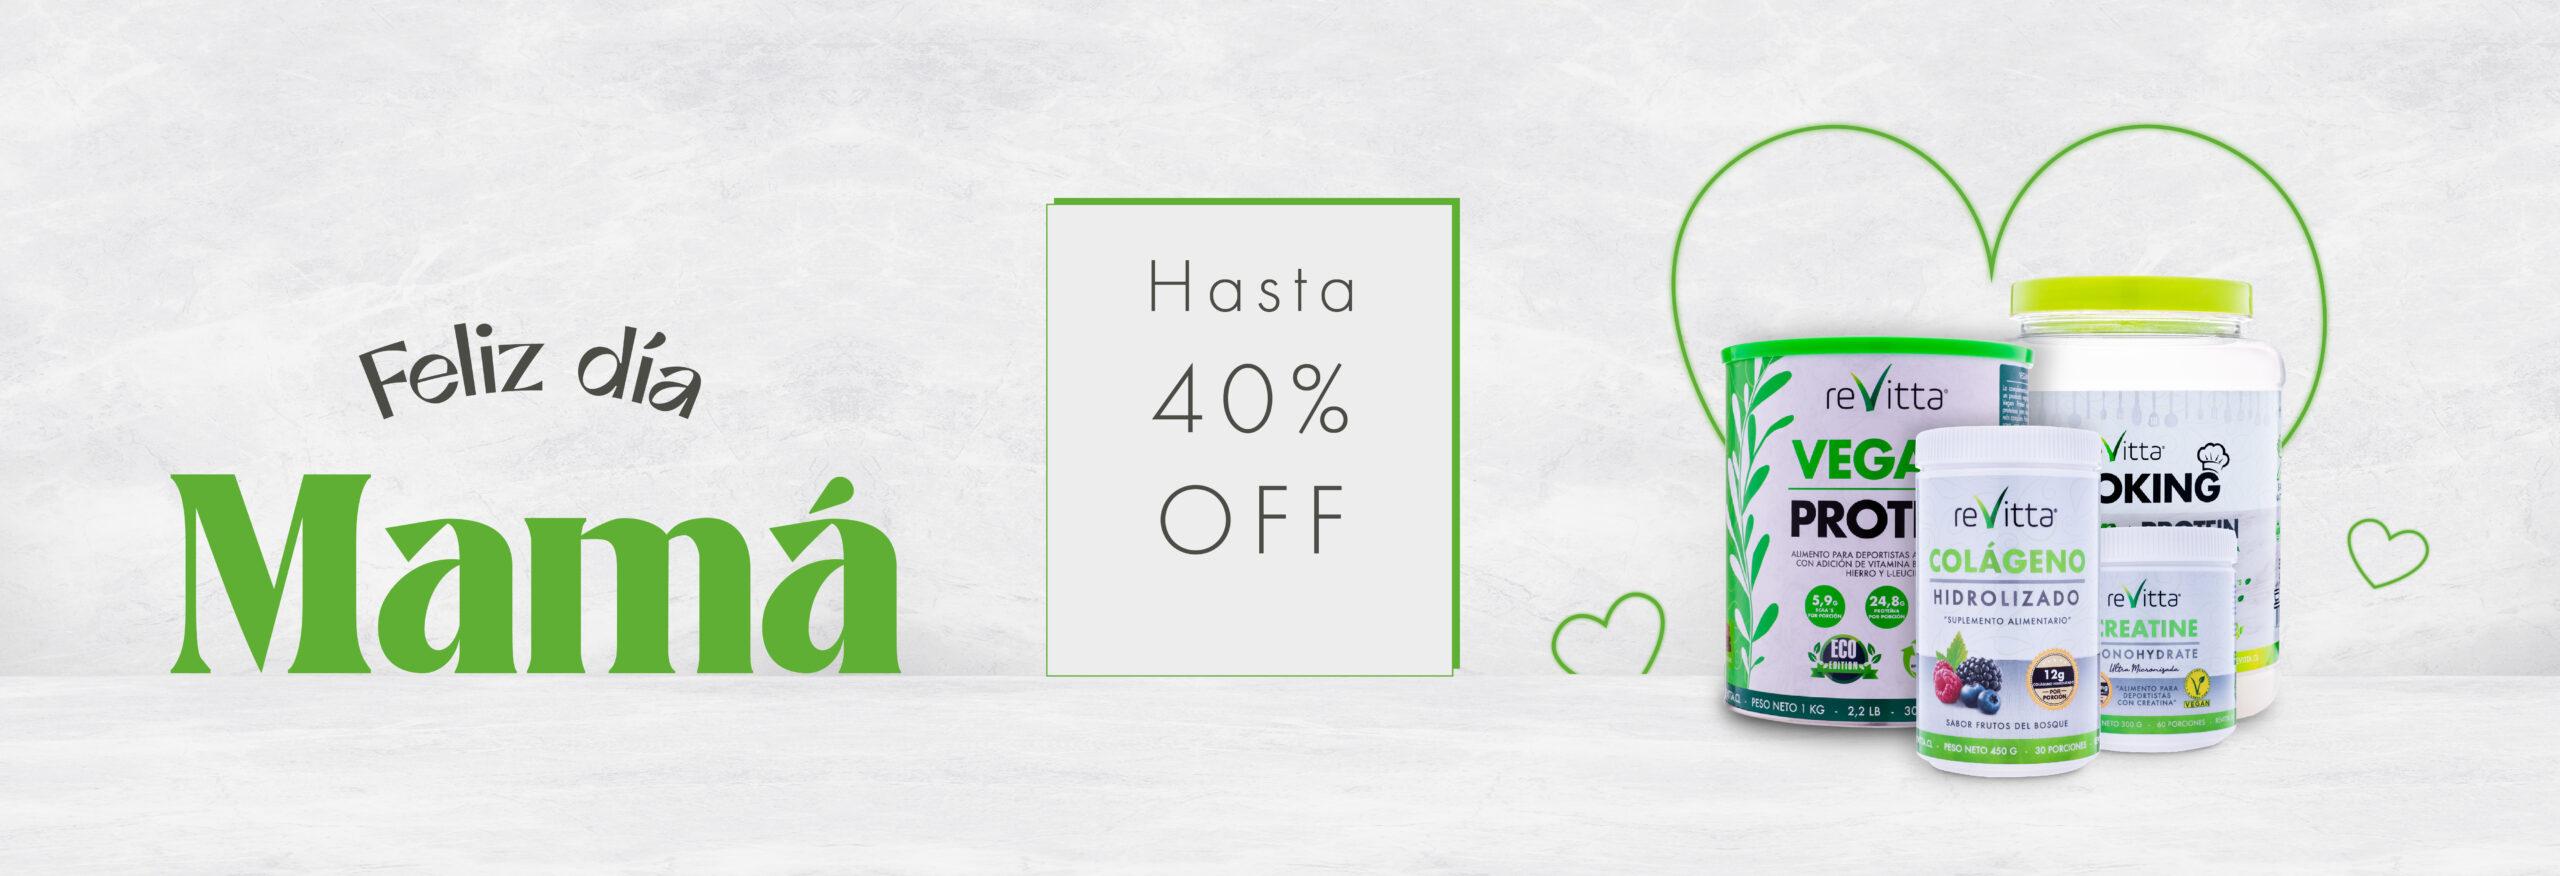 https://revitta.cl/product-category/ofertas/